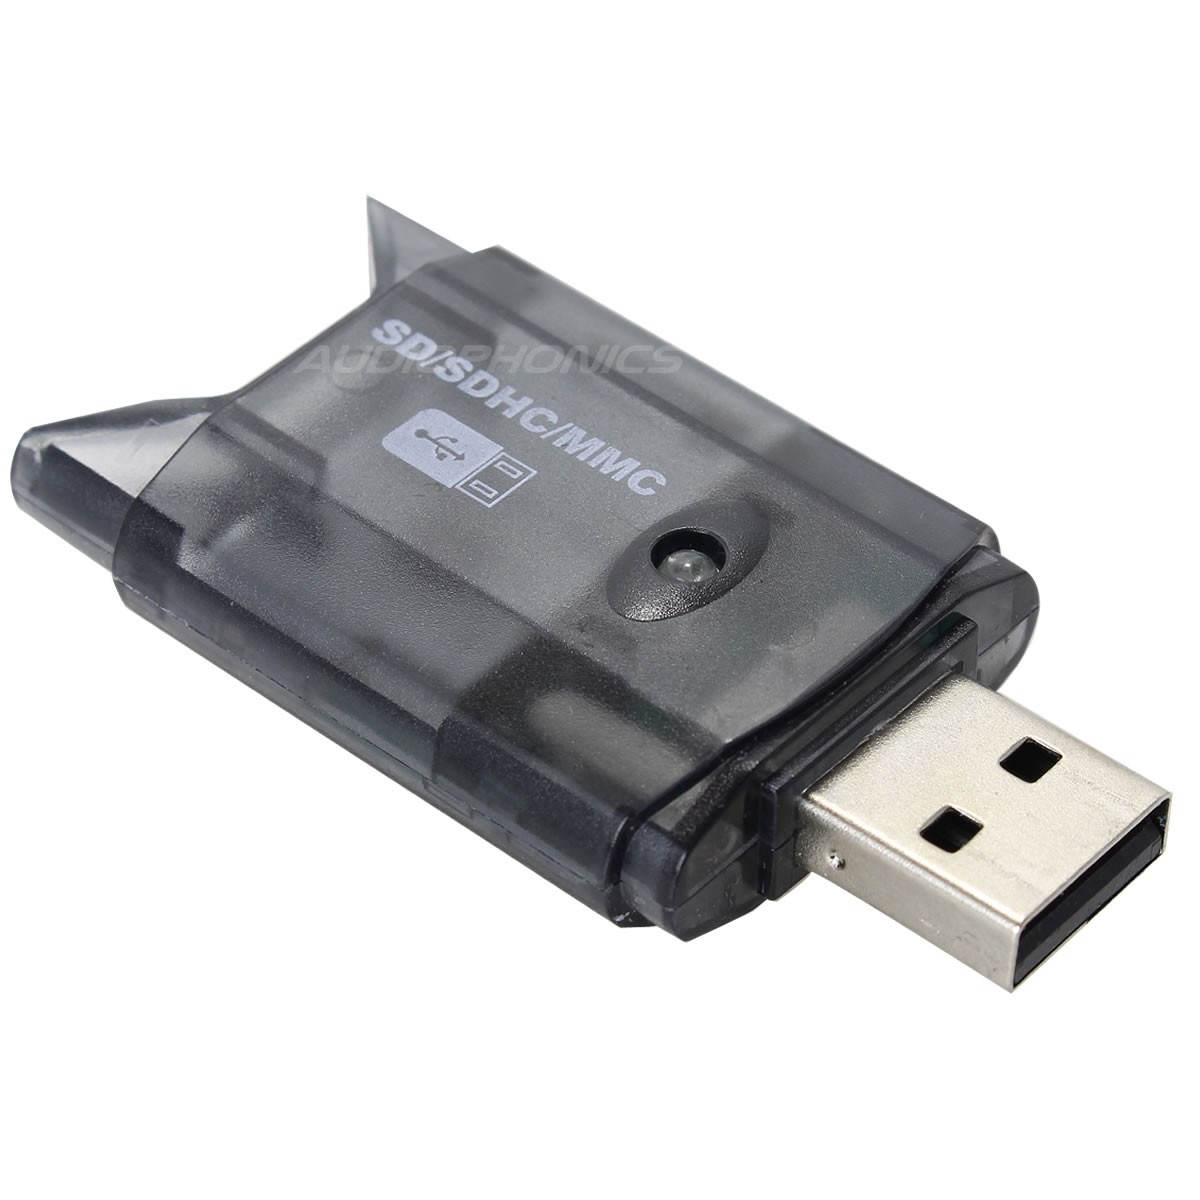 USB CARD reader Compatible with SD / SDHC / MMC / RSMMC